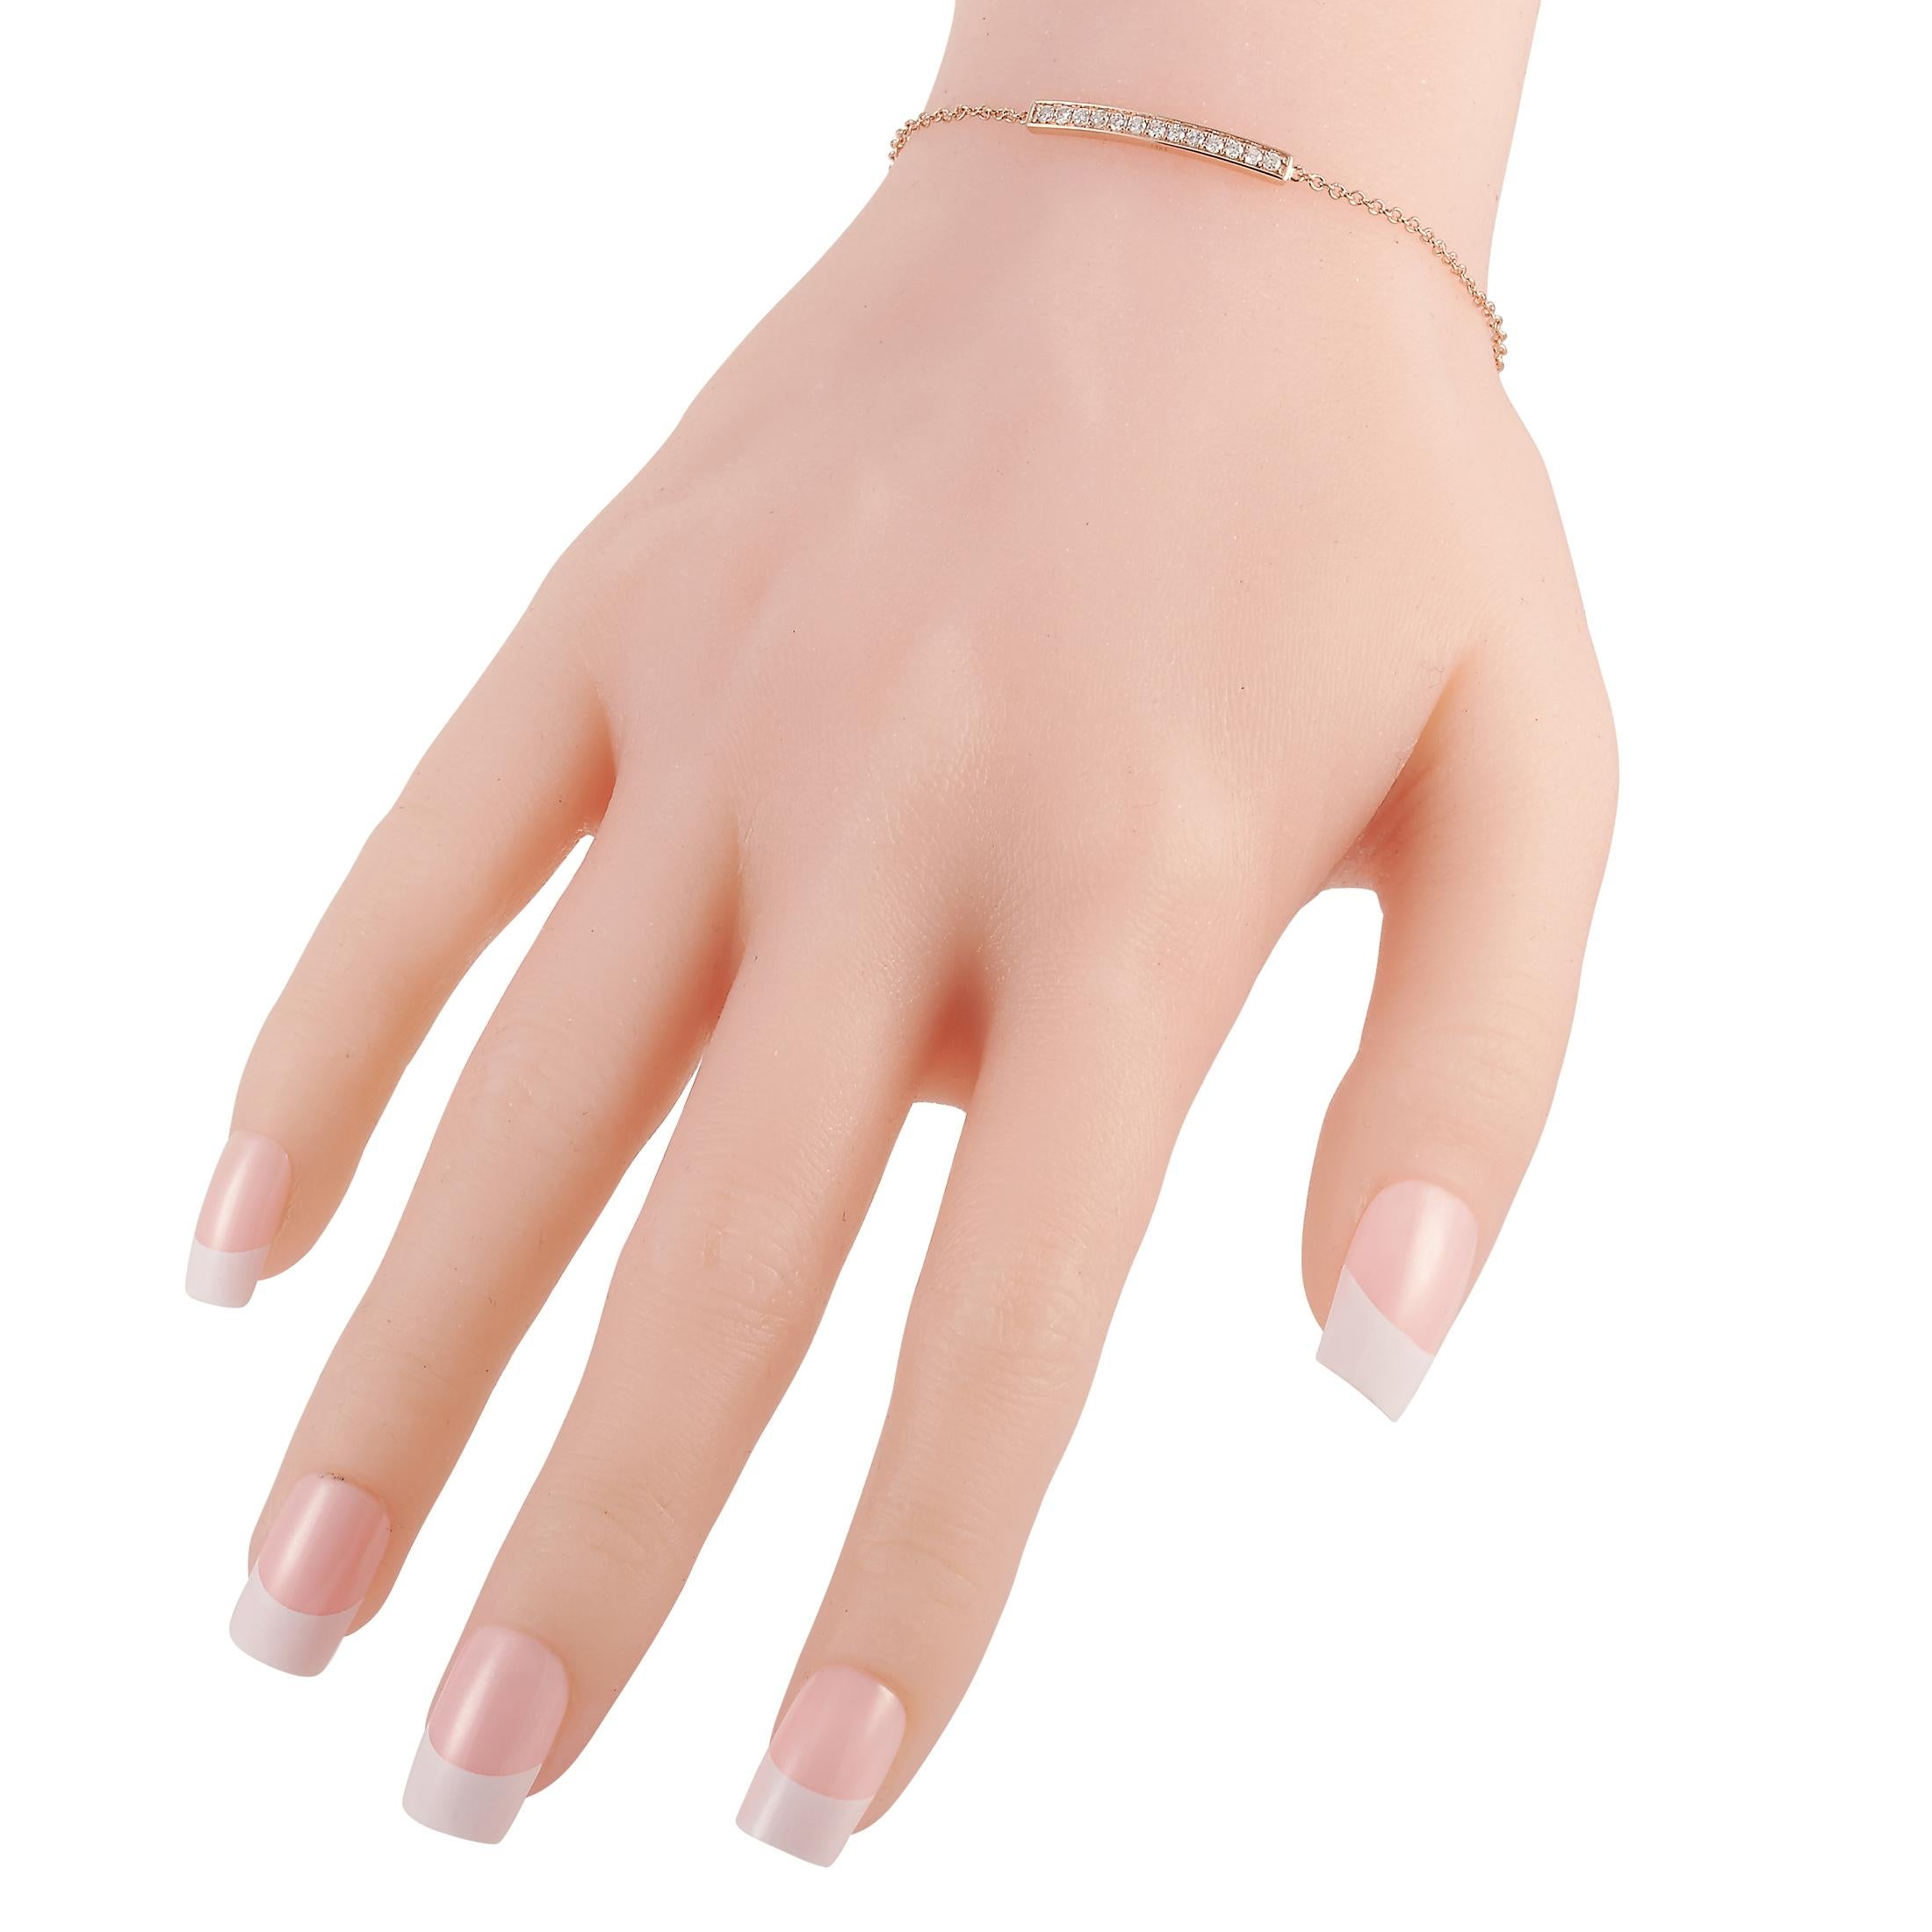 This LB Exclusive bracelet is made of 14K rose gold and embellished with diamonds that amount to 0.25 carats. The bracelet weighs 2 grams and measures 6.50” in length.
 
 Offered in brand new condition, this jewelry piece includes a gift box.